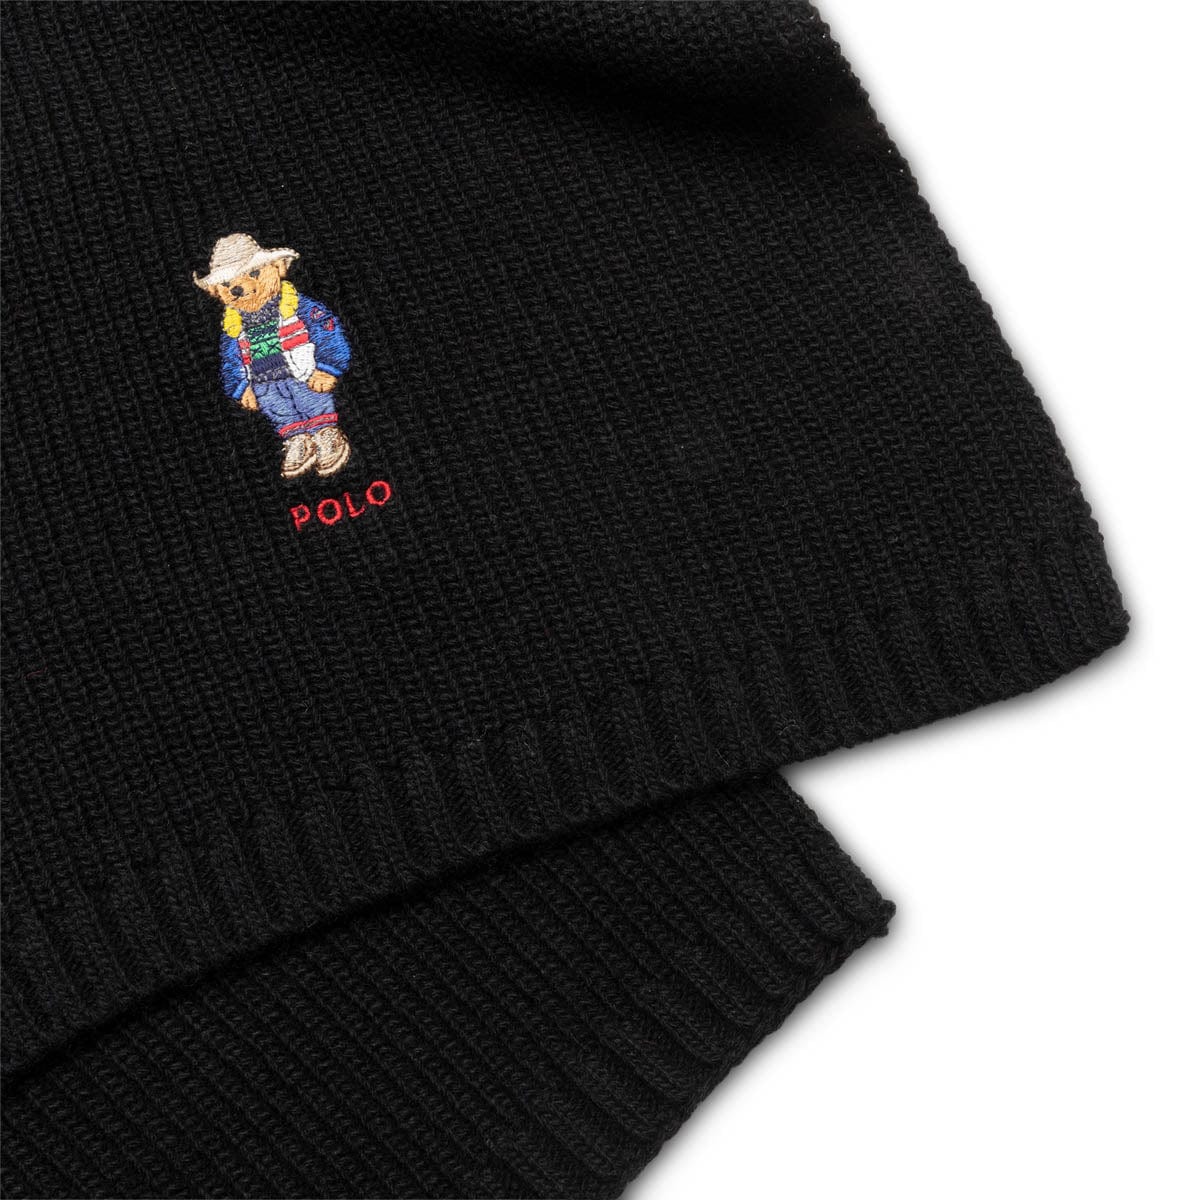 Polo Ralph Lauren Scarves & Gloves POLO BLACK / O/S SOLID HOLIDAY BEAR SCARF